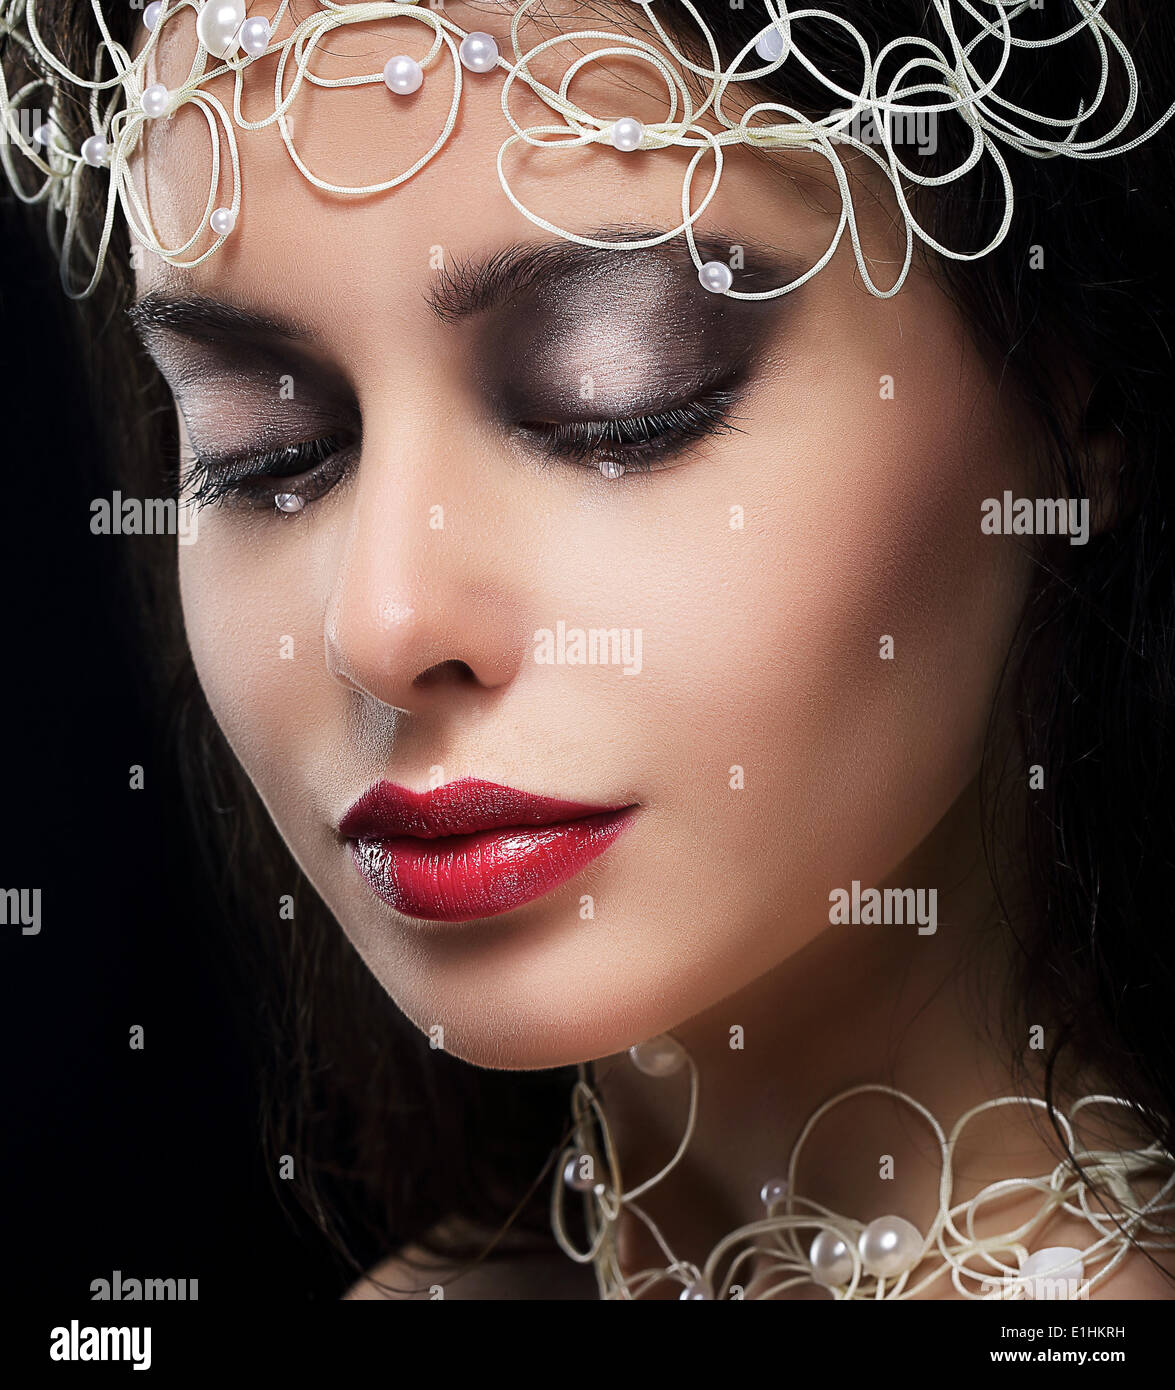 Stylish Fashionable Young Woman with Pearls in Reverie Stock Photo